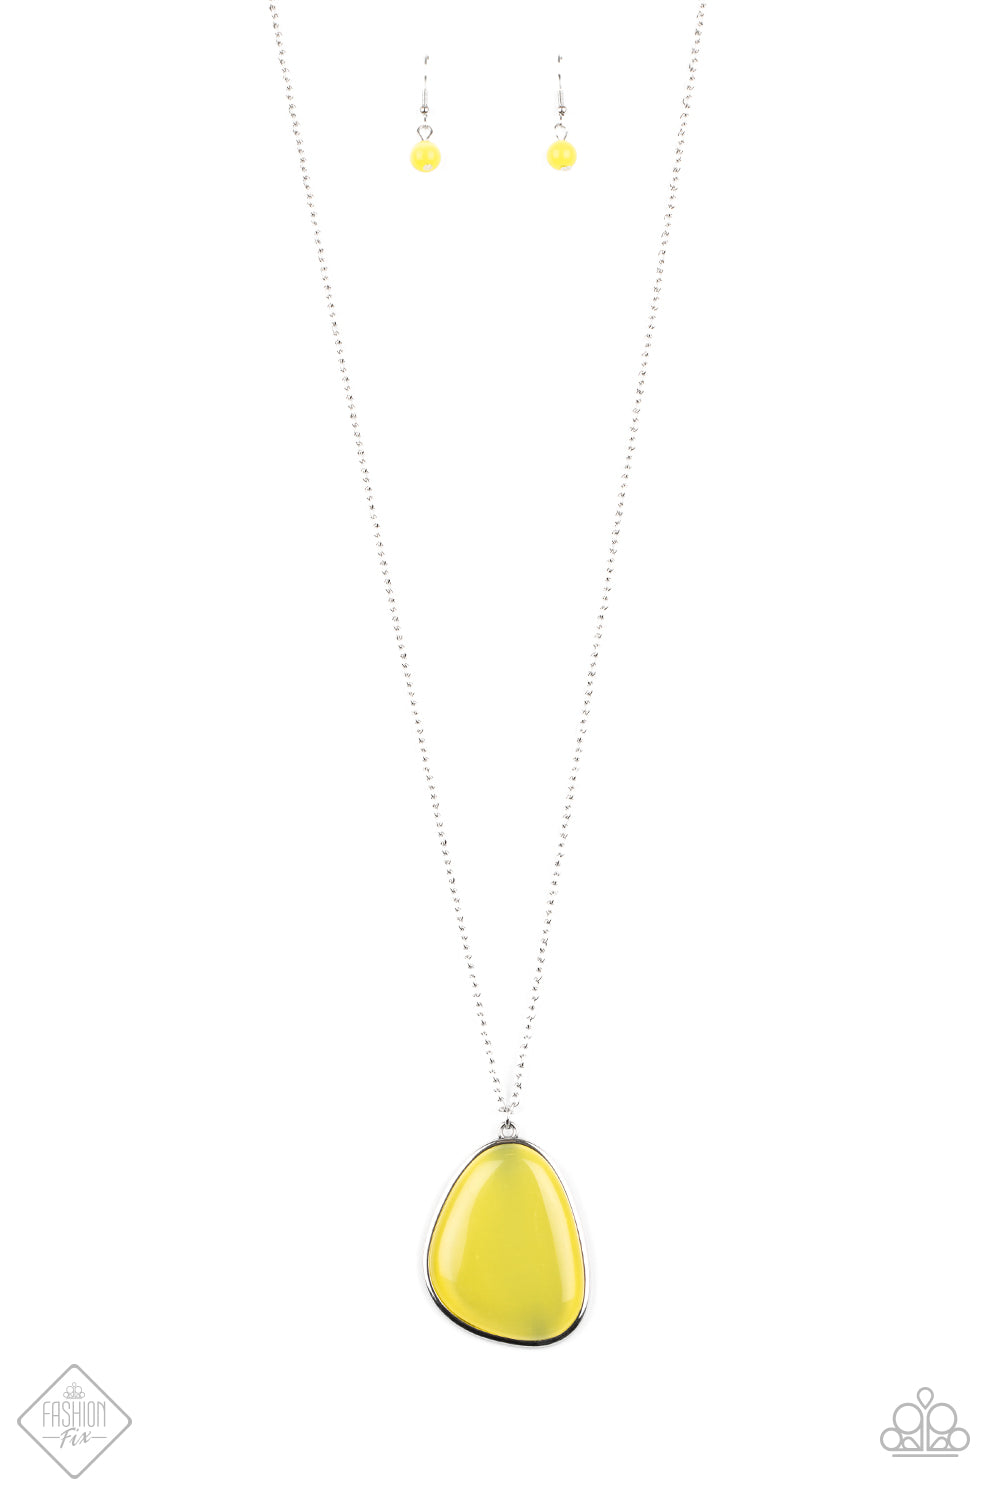 Ethereal Experience - Yellow Necklace Paparazzi Accessories. Subscribe & Save!